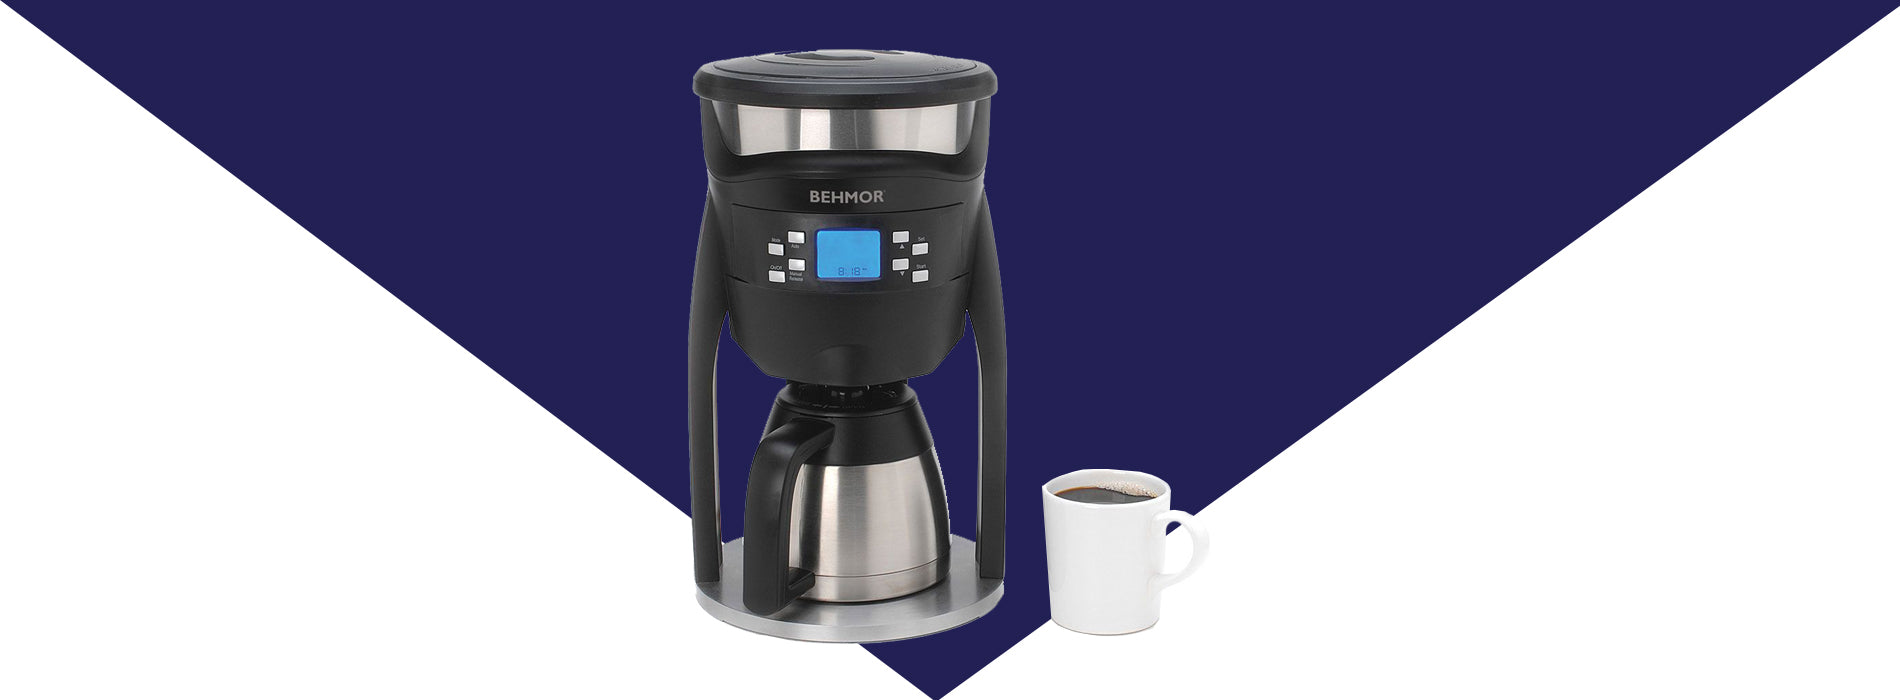 Behmor Connected Coffee Brewer review: An excellent, expensive